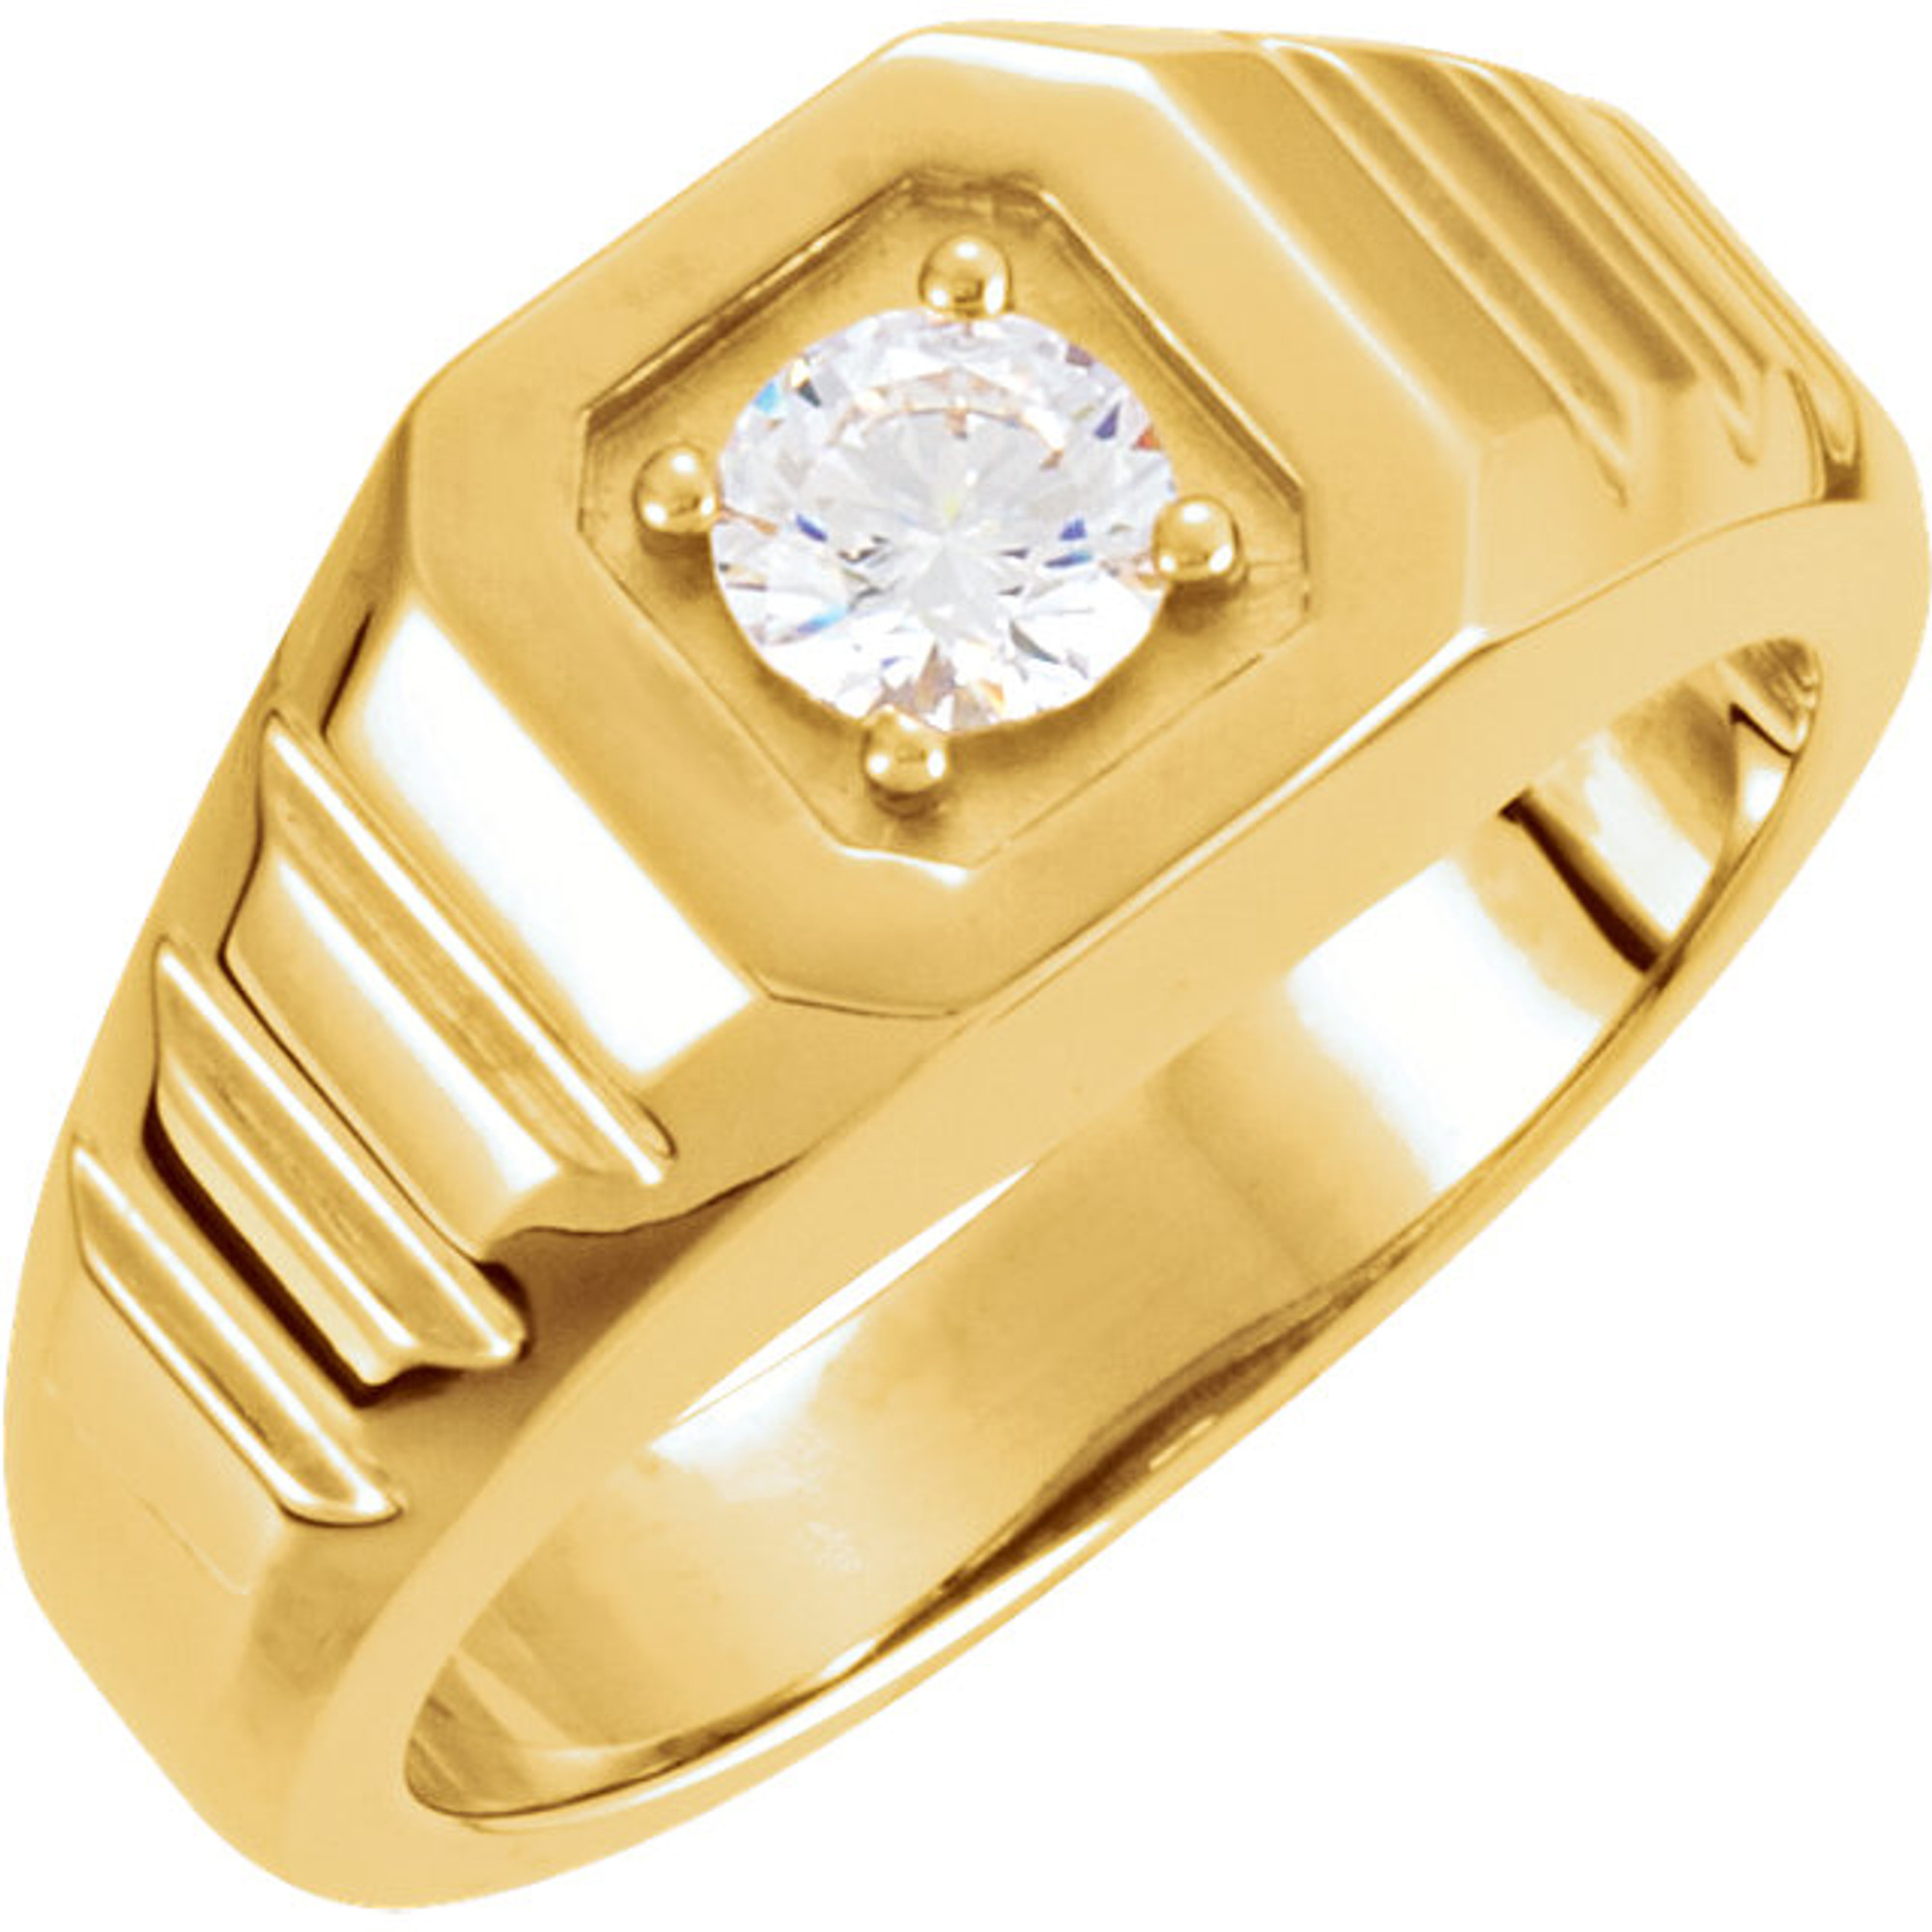 Men's Round Diamond Channel Engagement Ring in 14k Yellow Gold (1/3 ct. tw.)